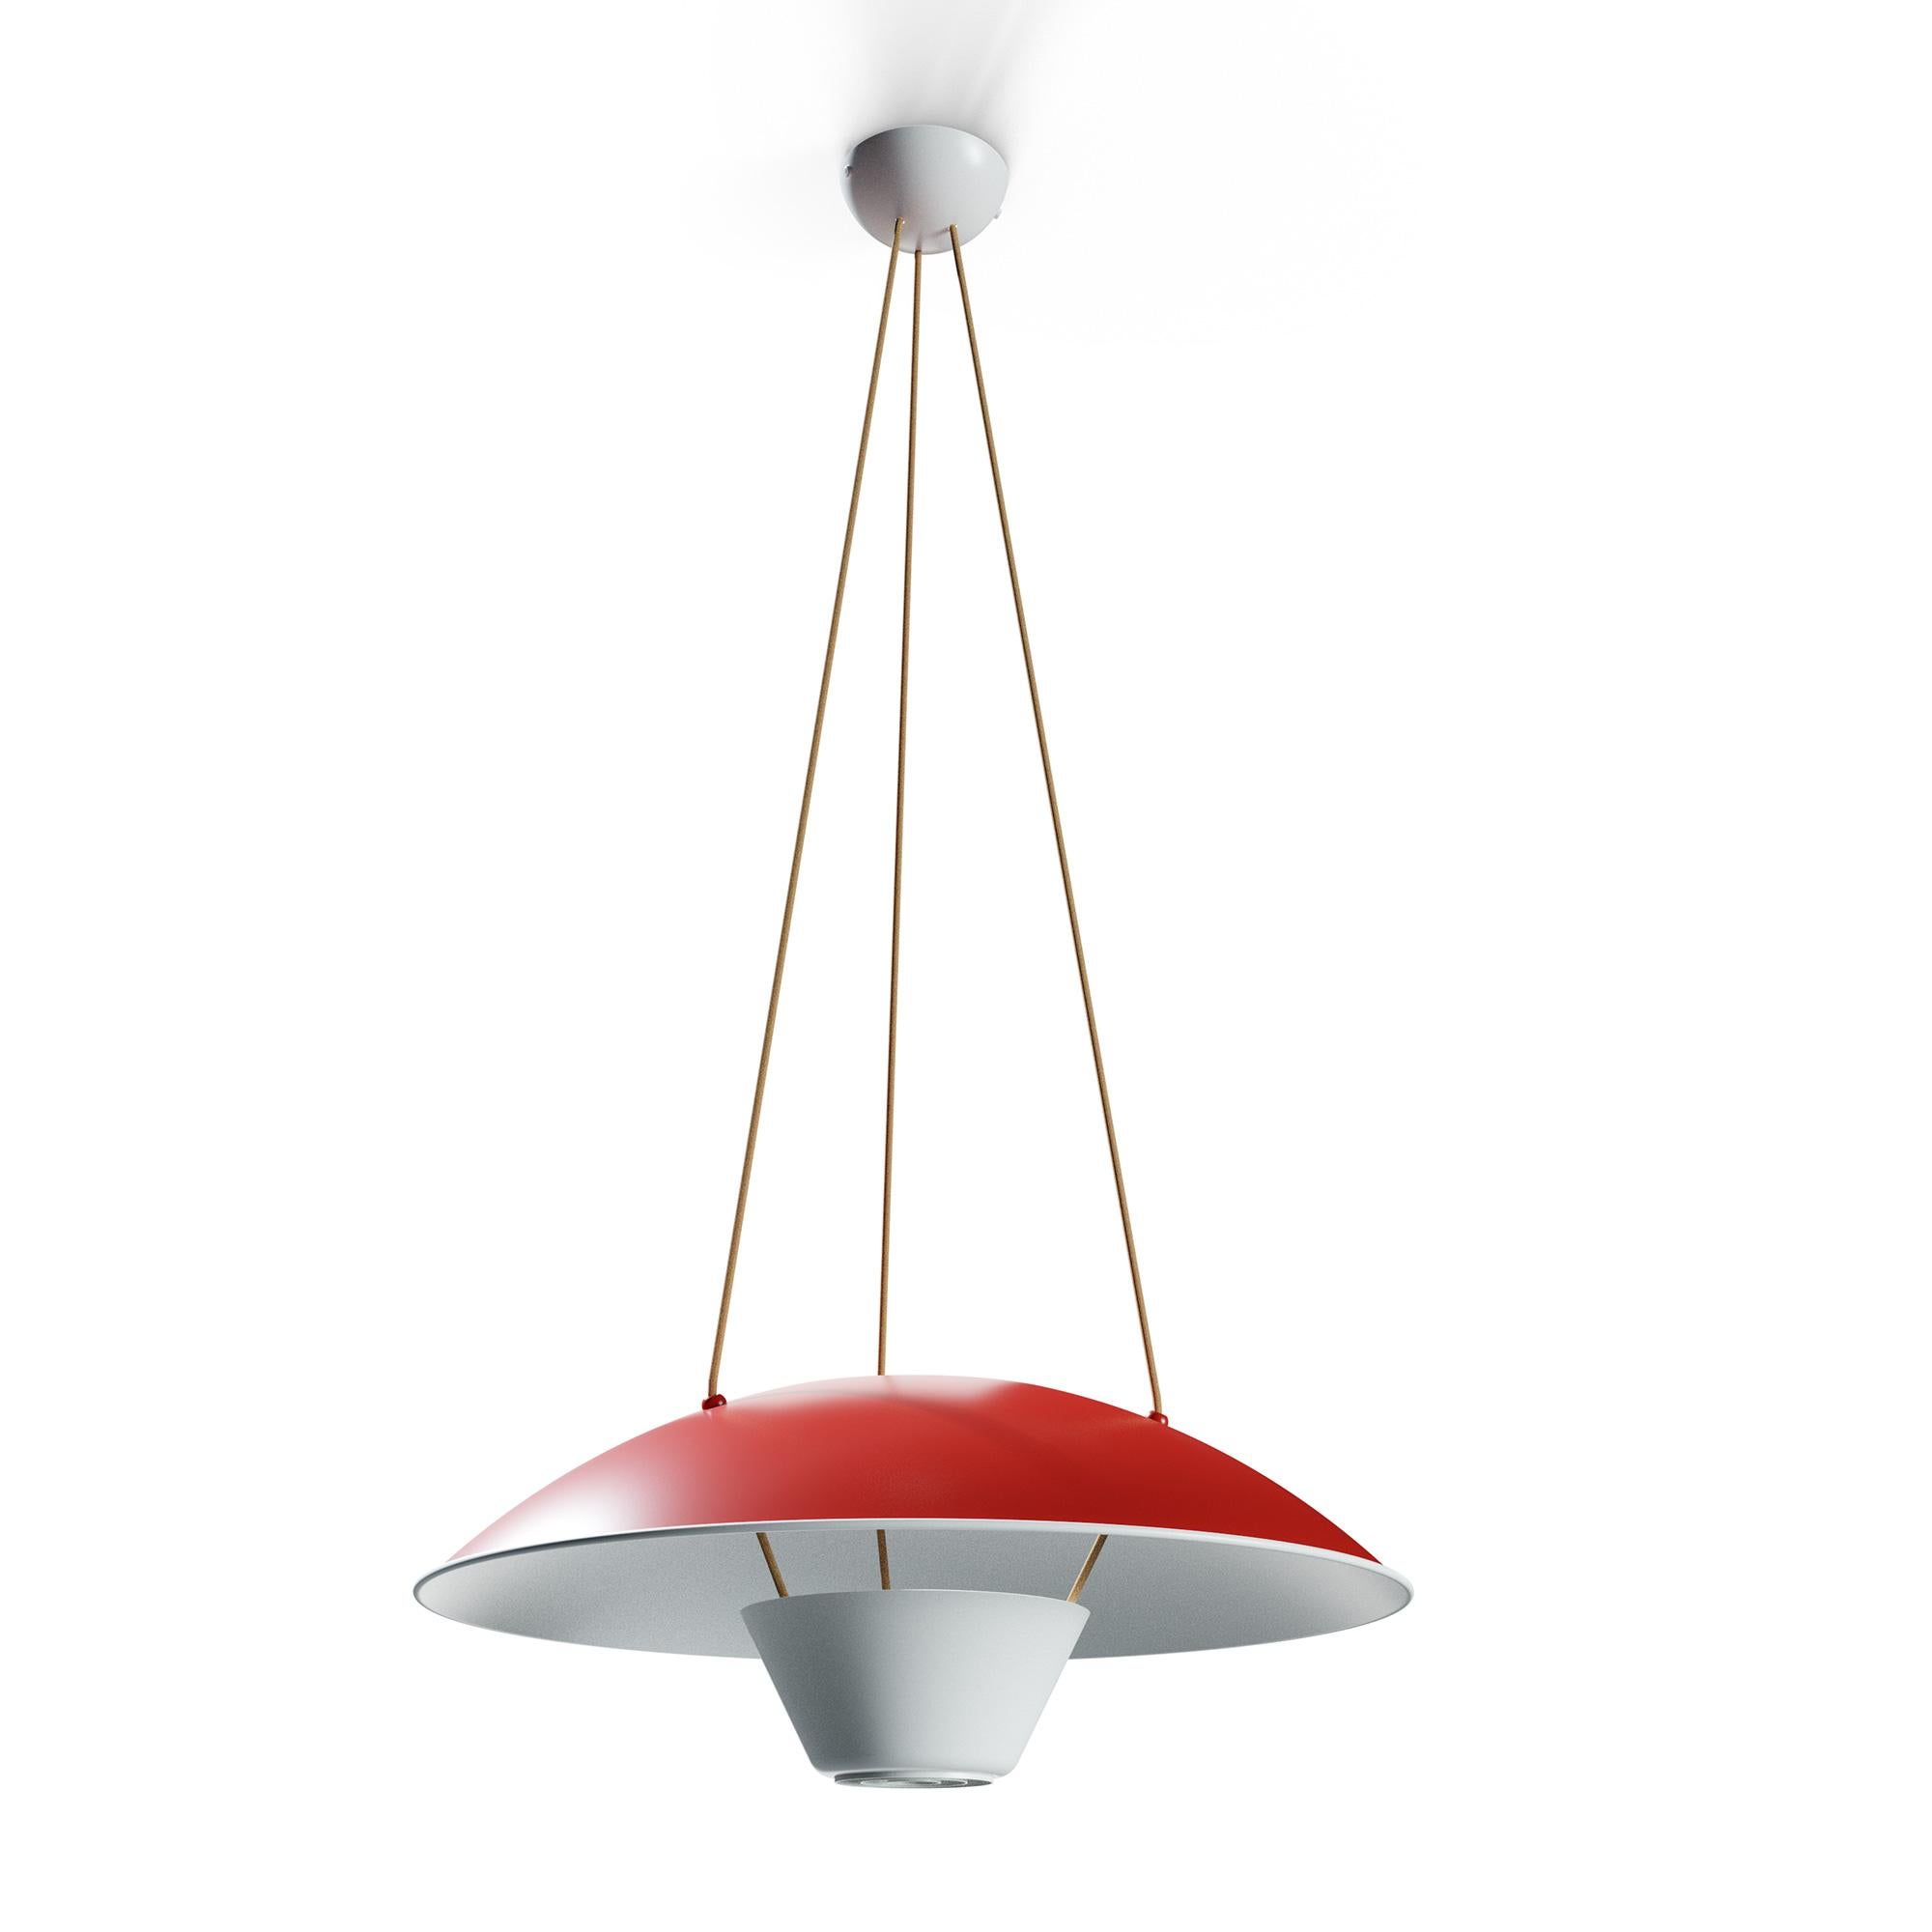 Michel Mortier M4 suspension lamp in red for Disderot. Originally designed in 1952, this sculptural lamp is a newly produced numbered edition with authentication certificate made in France by Disderot with many of the same small-scale manufacturing